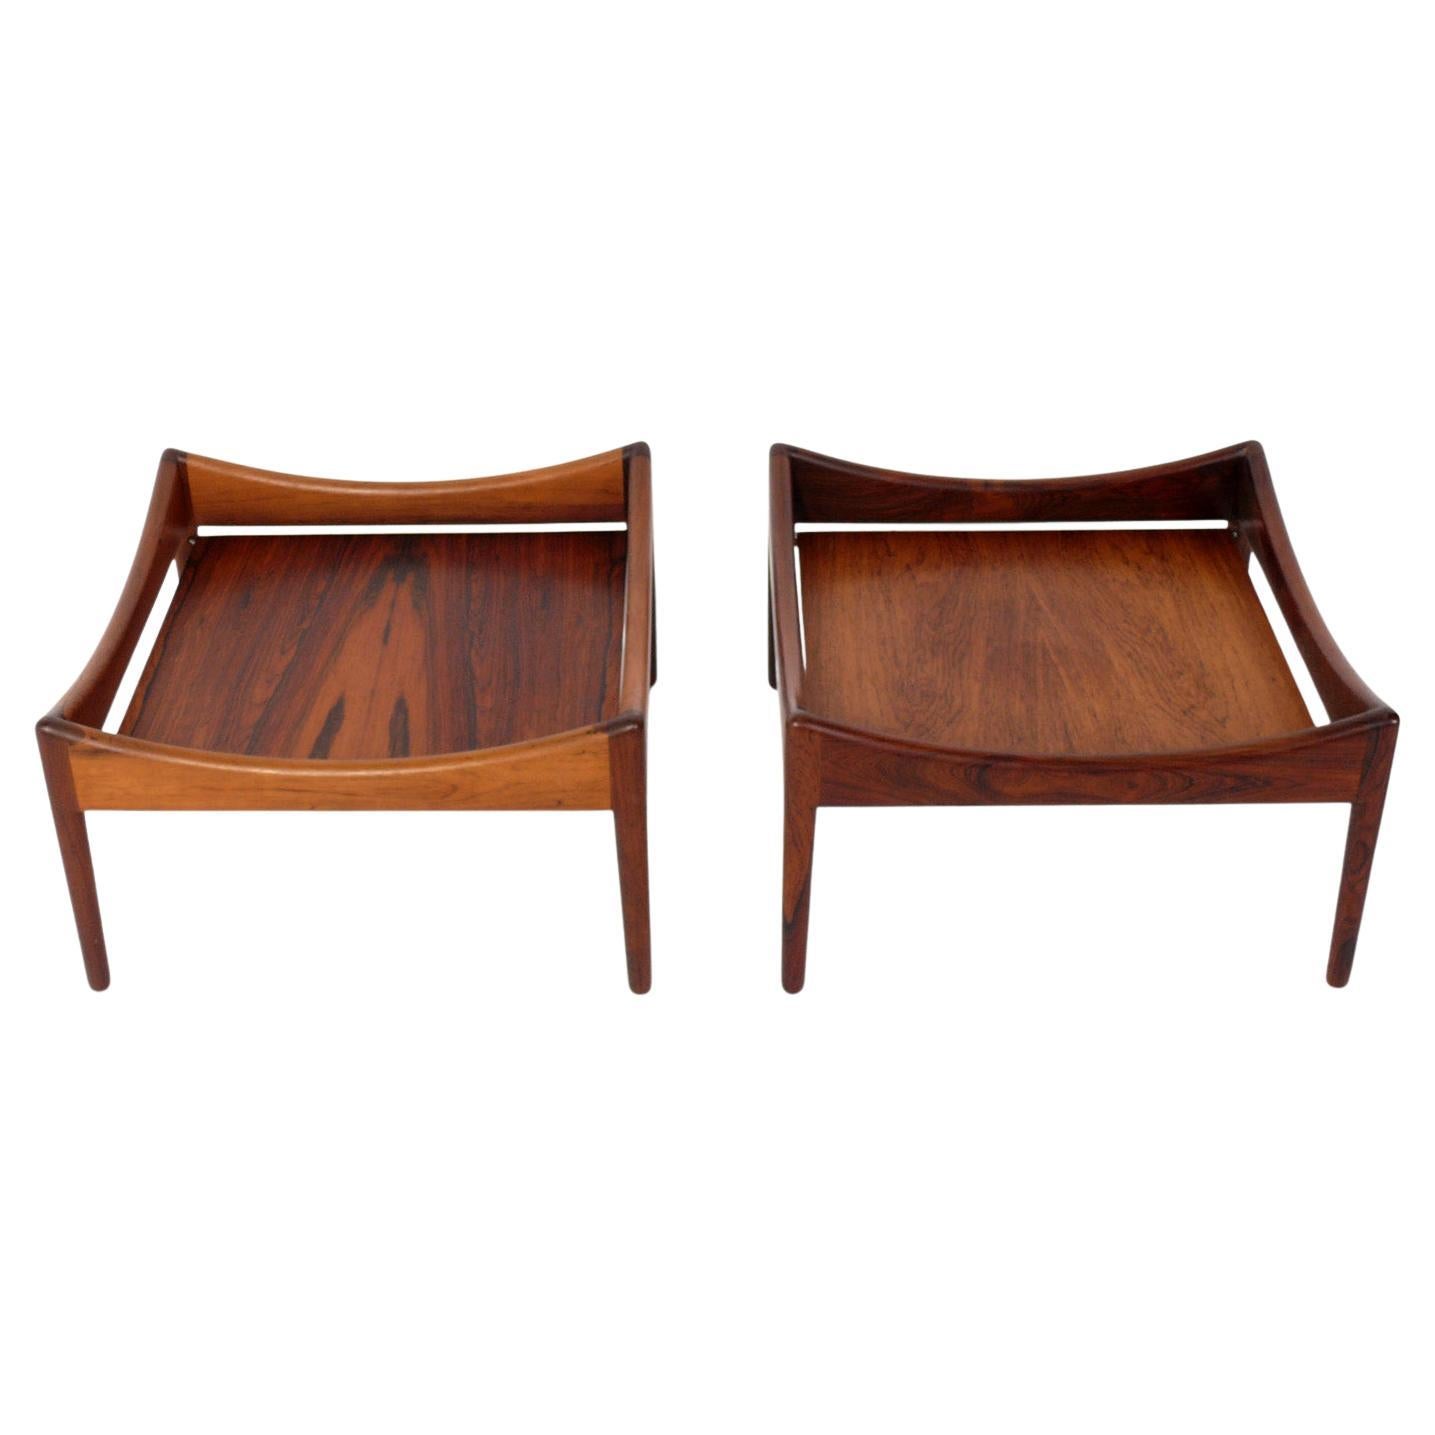 Pair of Danish Modern Rosewood Tables by Kristian Vedel For Sale